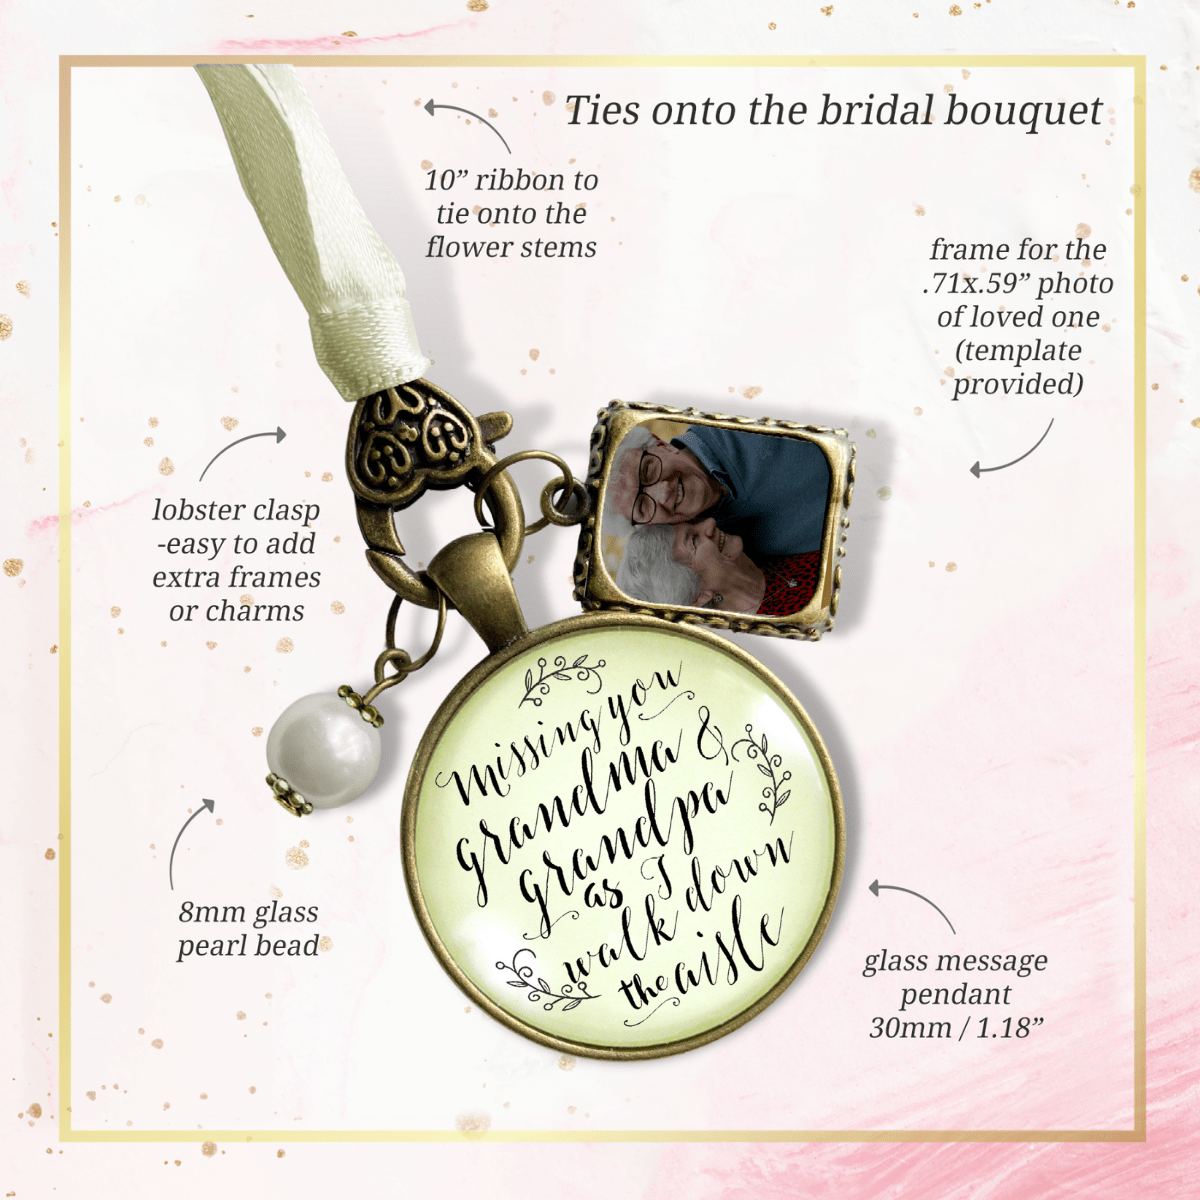 Bouquet Charm Bridal Memorial Grandma And Grandpa Miss You Wedding Day Vintage Bronze Picture Frame - Gutsy Goodness Handmade Jewelry Gifts